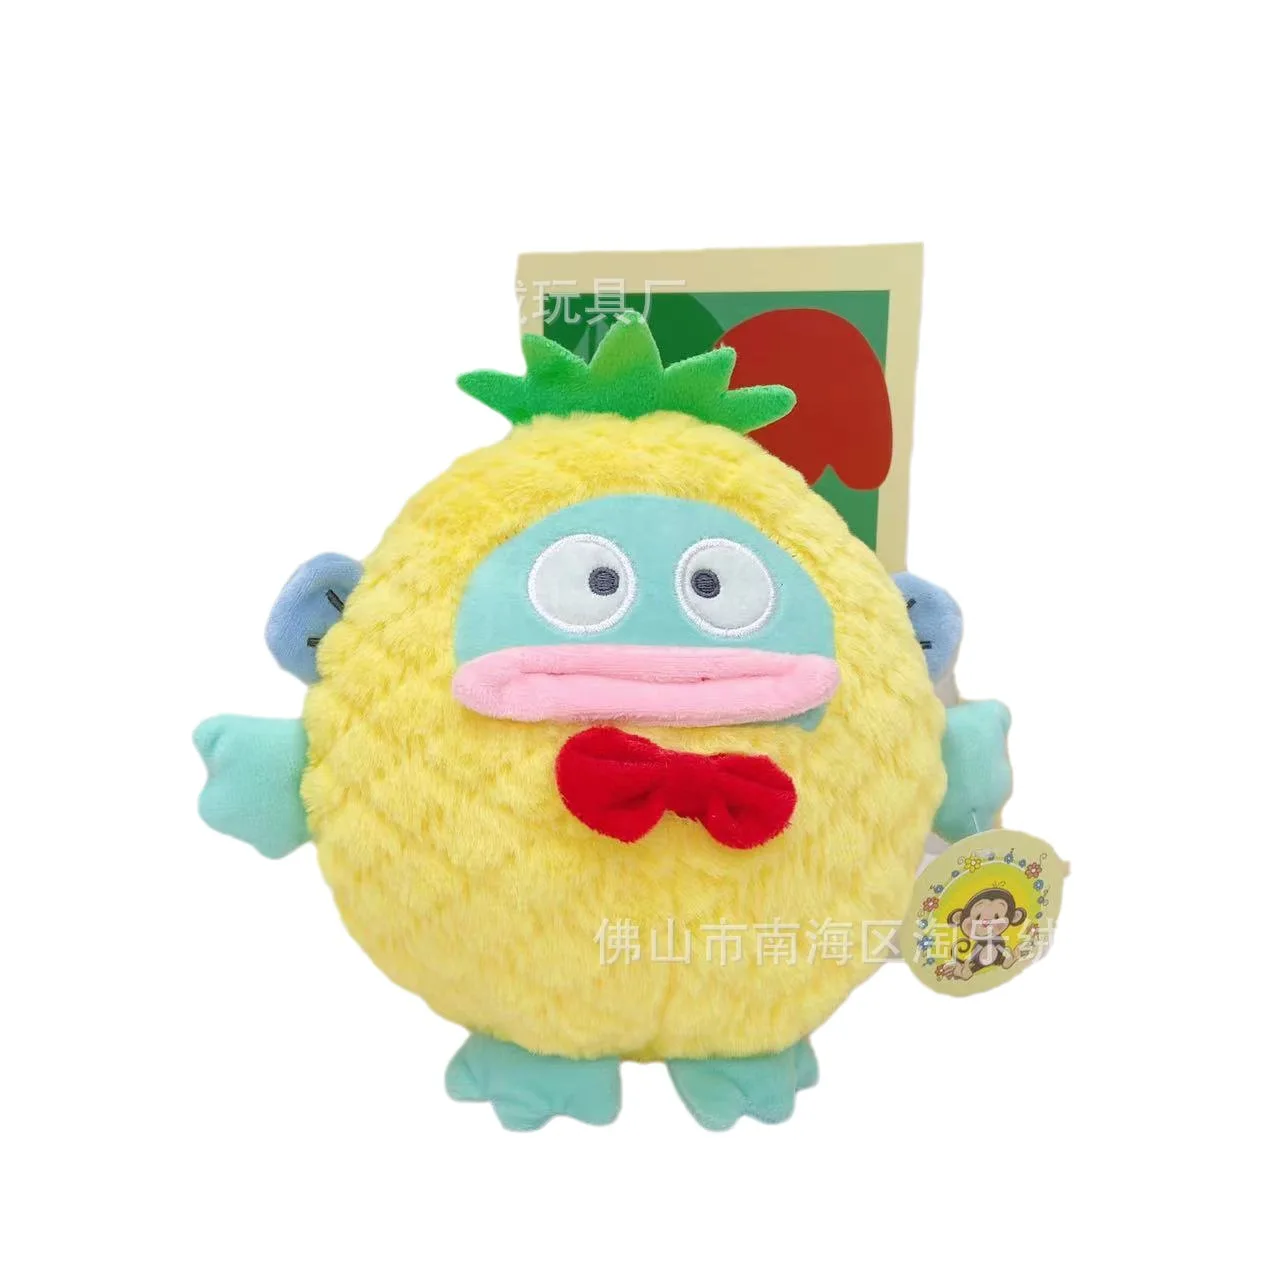 New Arrival Stuffed Animal Super Cute Japanese Cartoon 8 inch Pineapple Ugly Fish Plush Doll Grab Doll for Girls